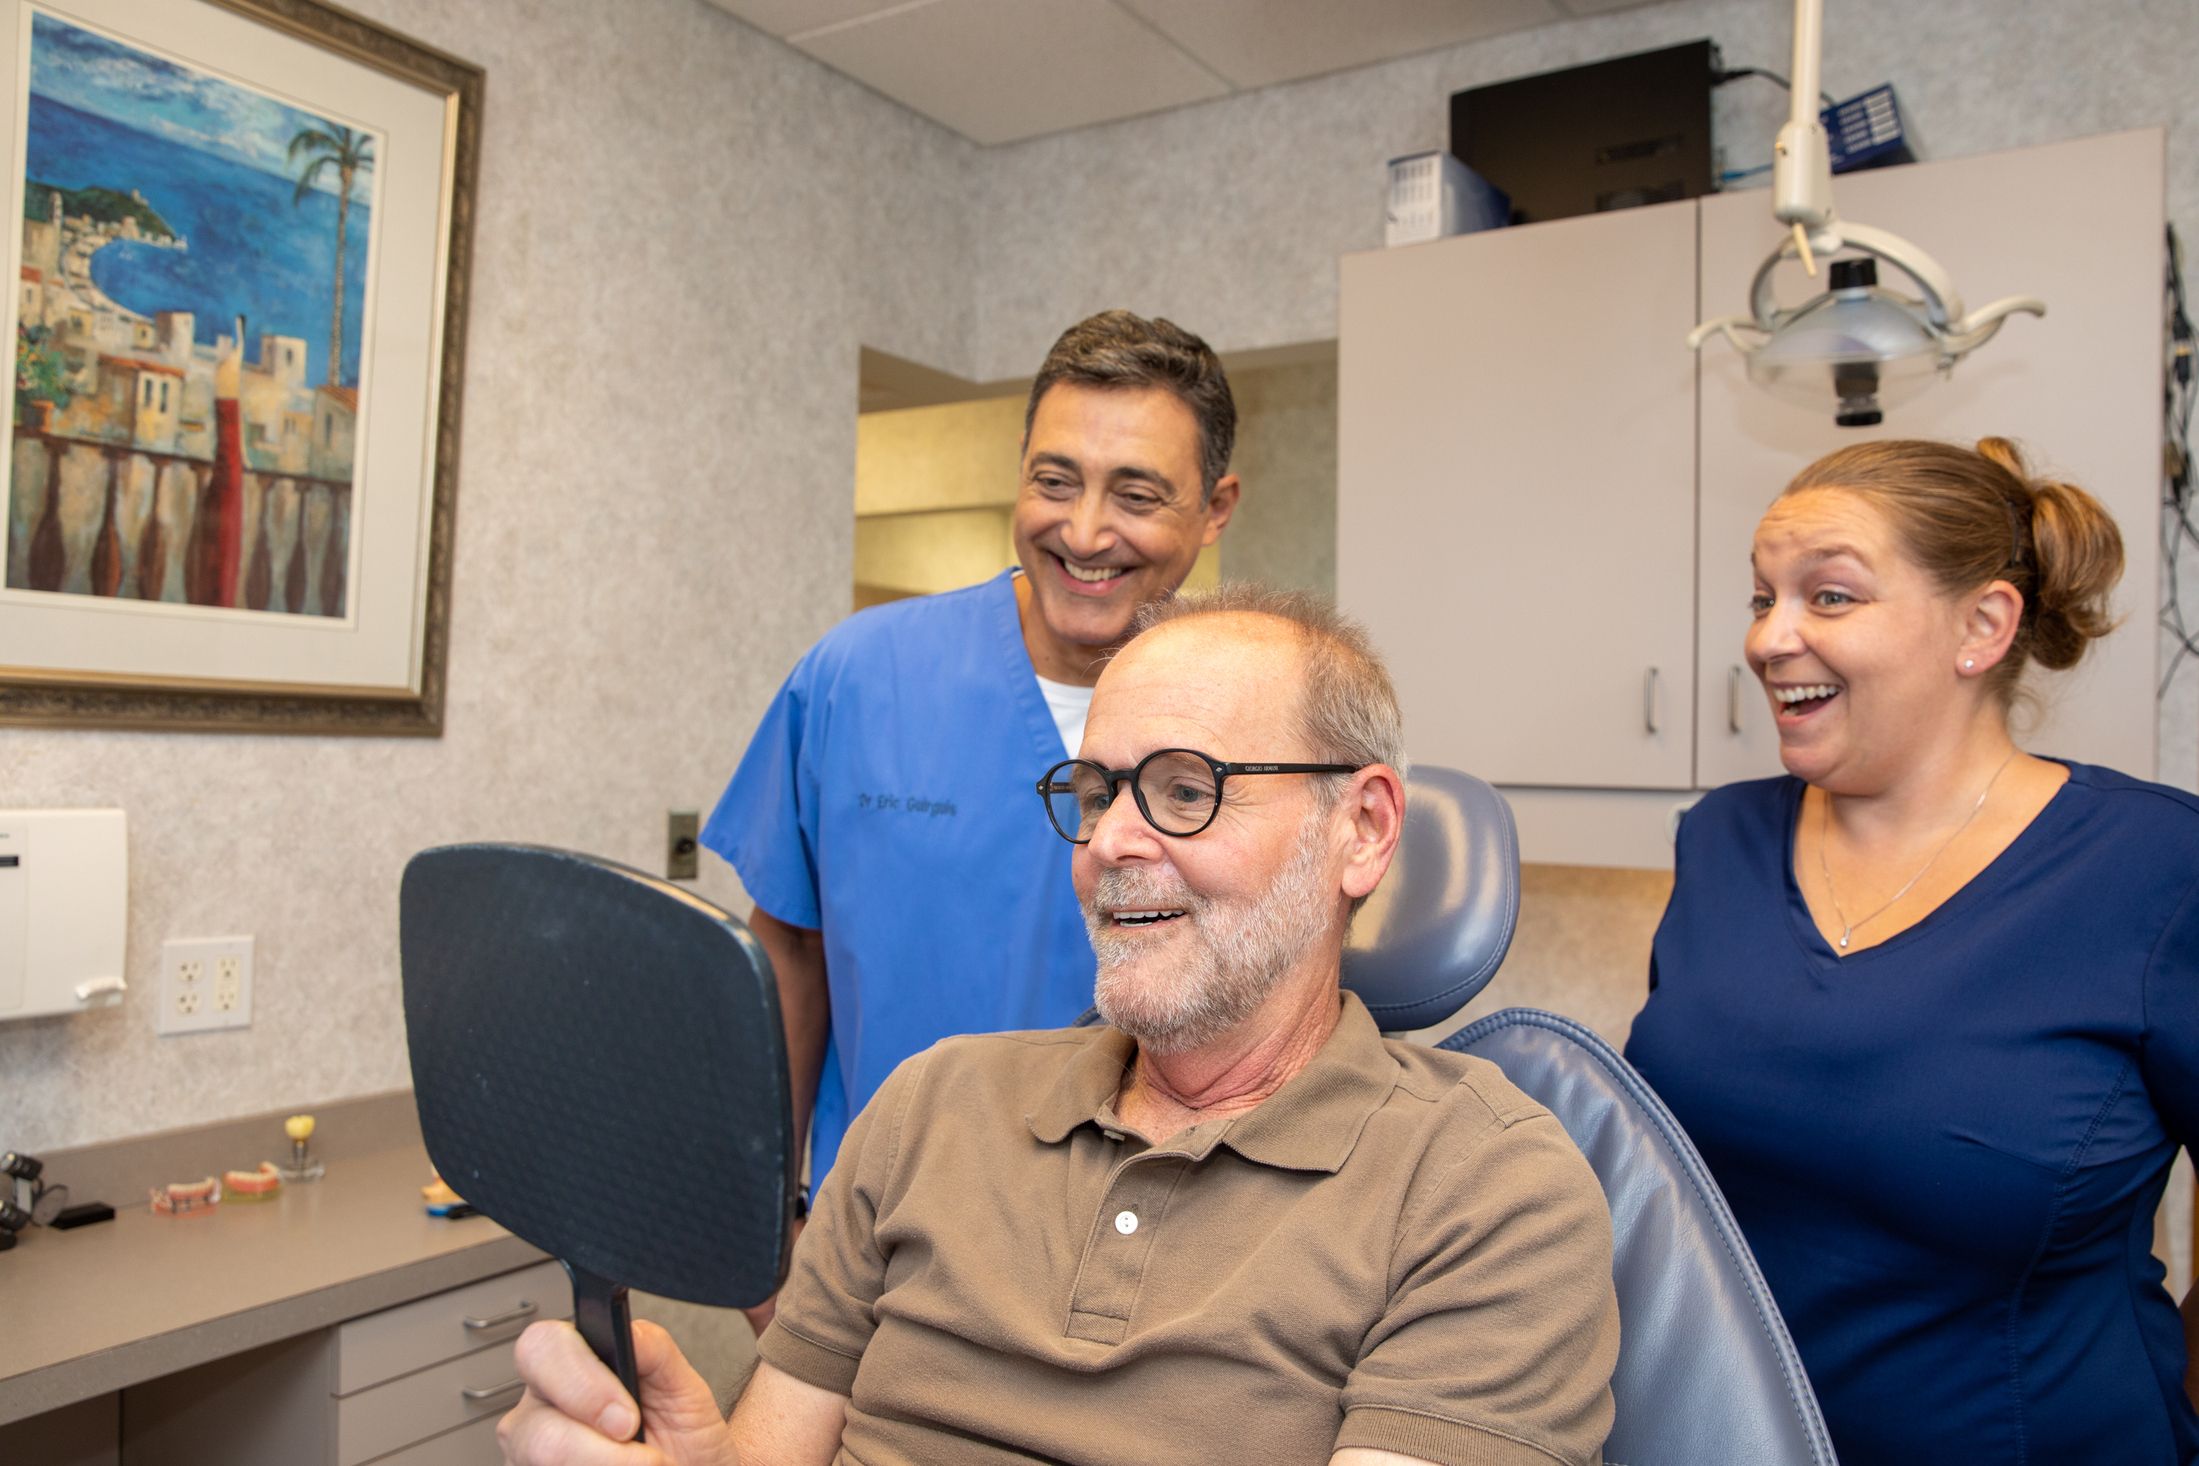 Dr. Guirguis smiling with a patient in a mirror.